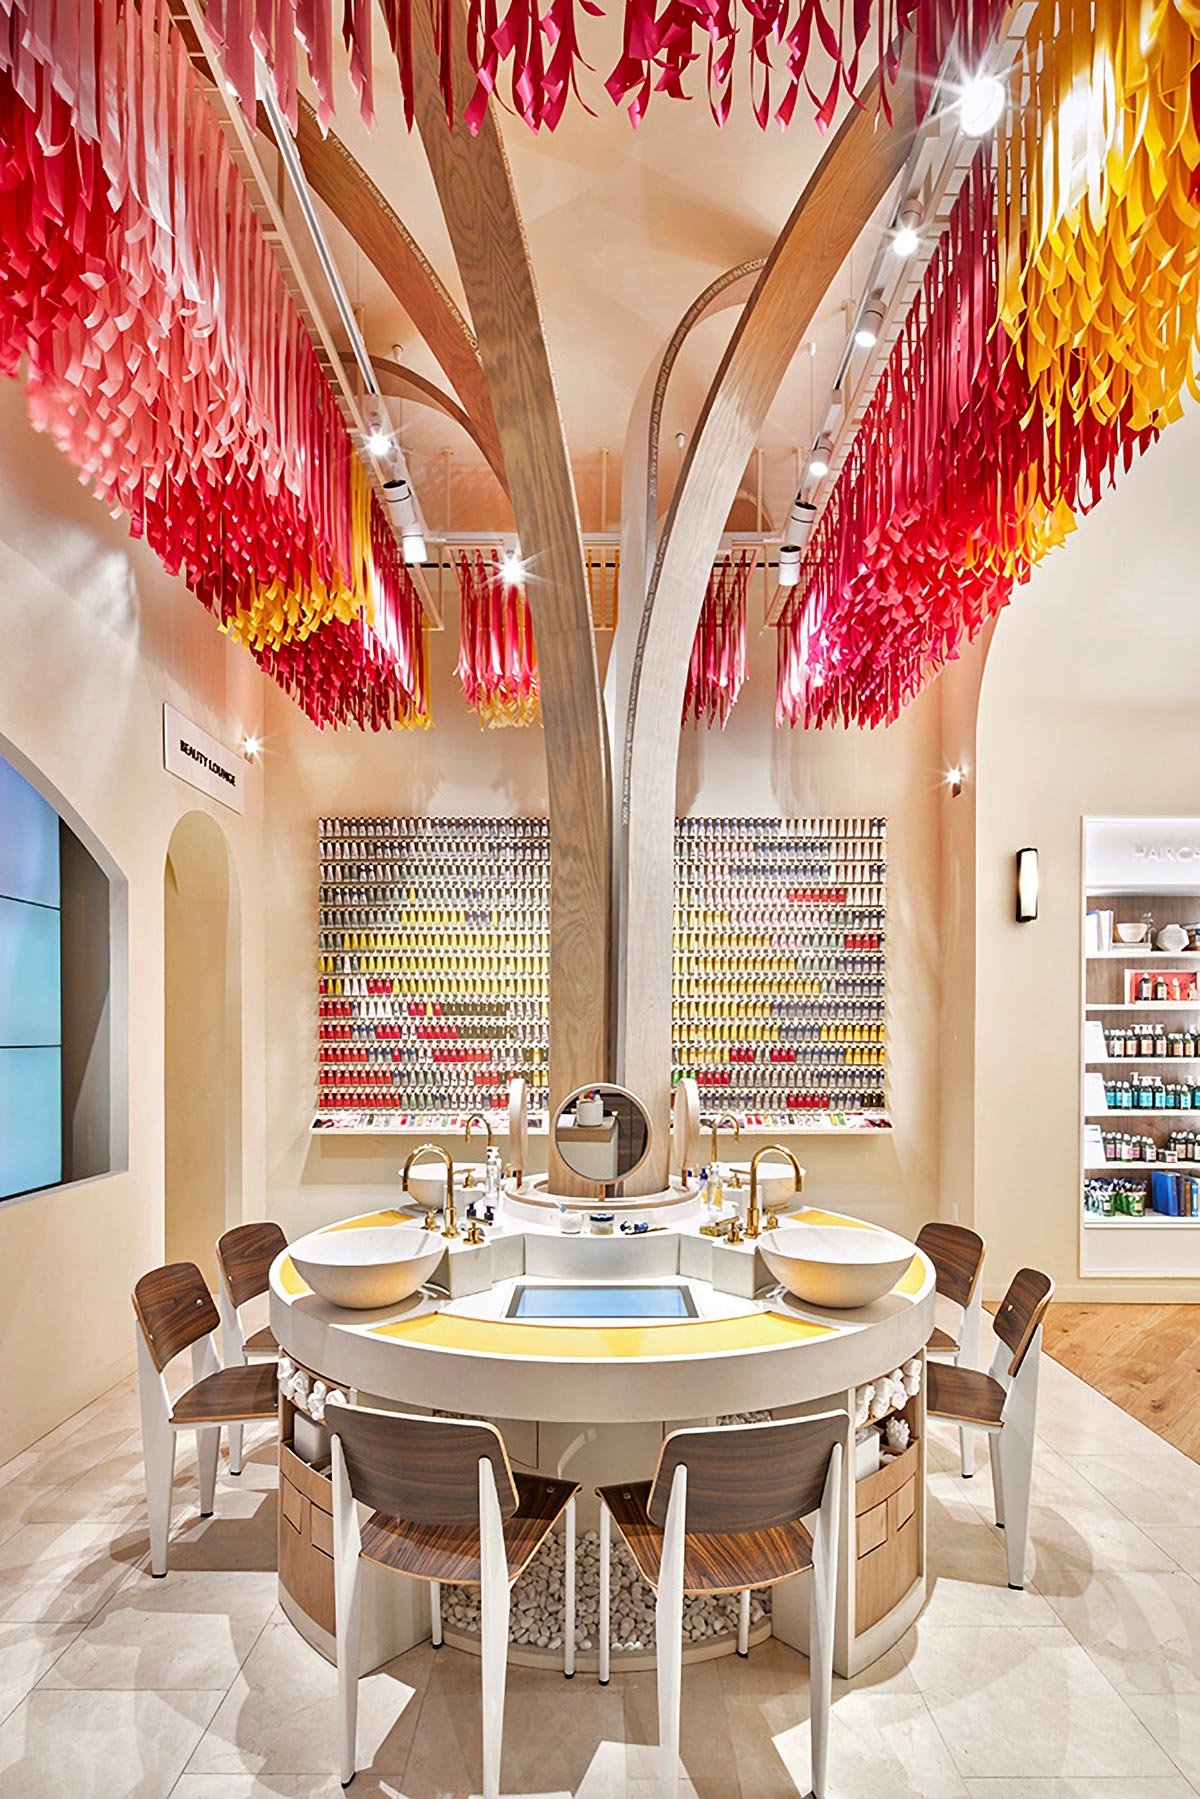 An experiential community store and flagship location in New York City’s L'Occitane Flatiron neighborhood